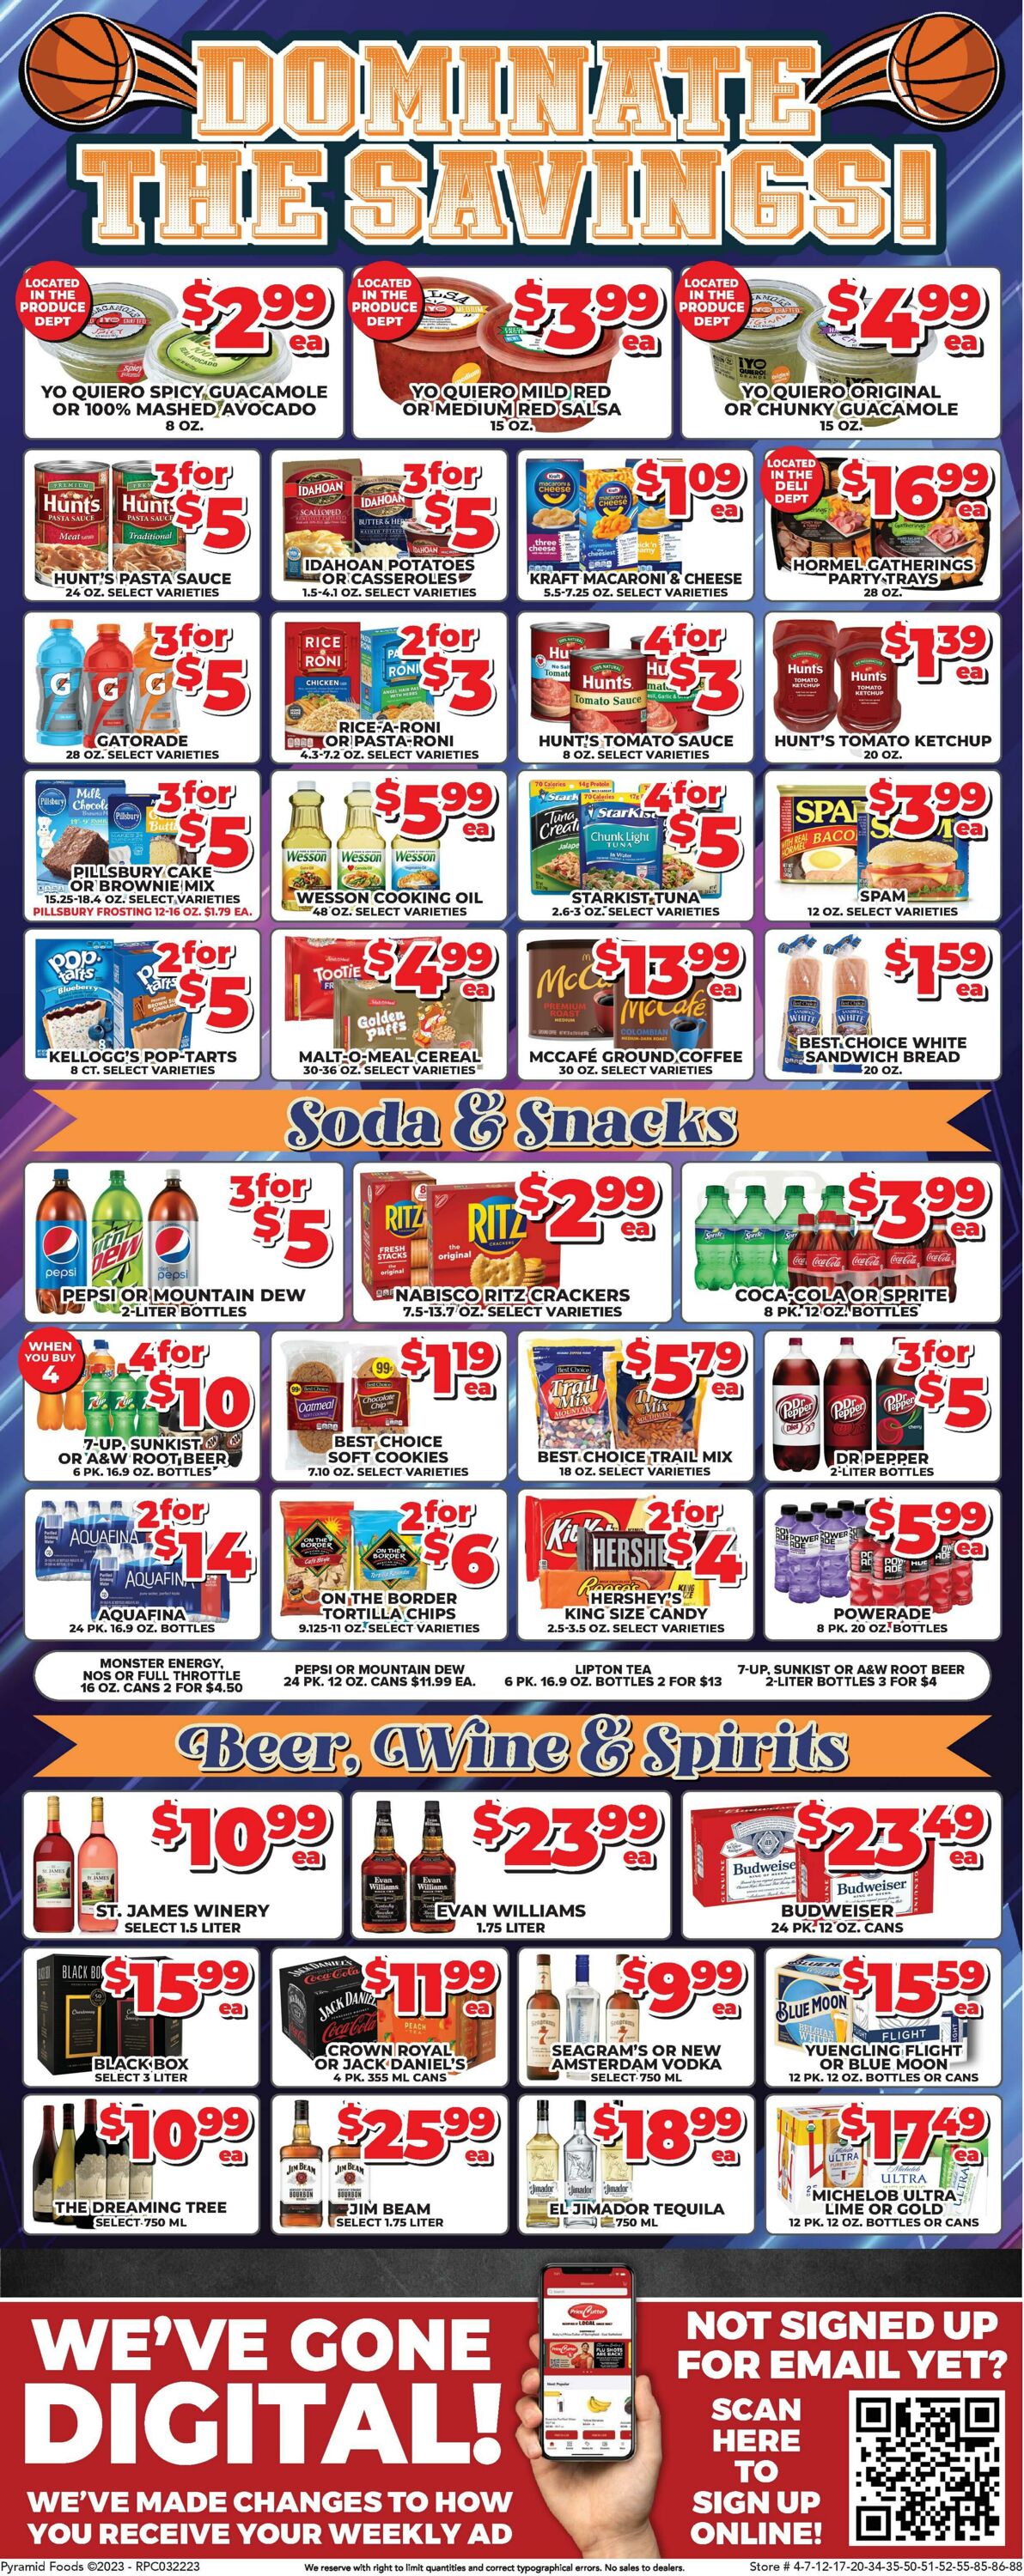 Weekly ad Price Cutter 03/22/2023 - 03/28/2023